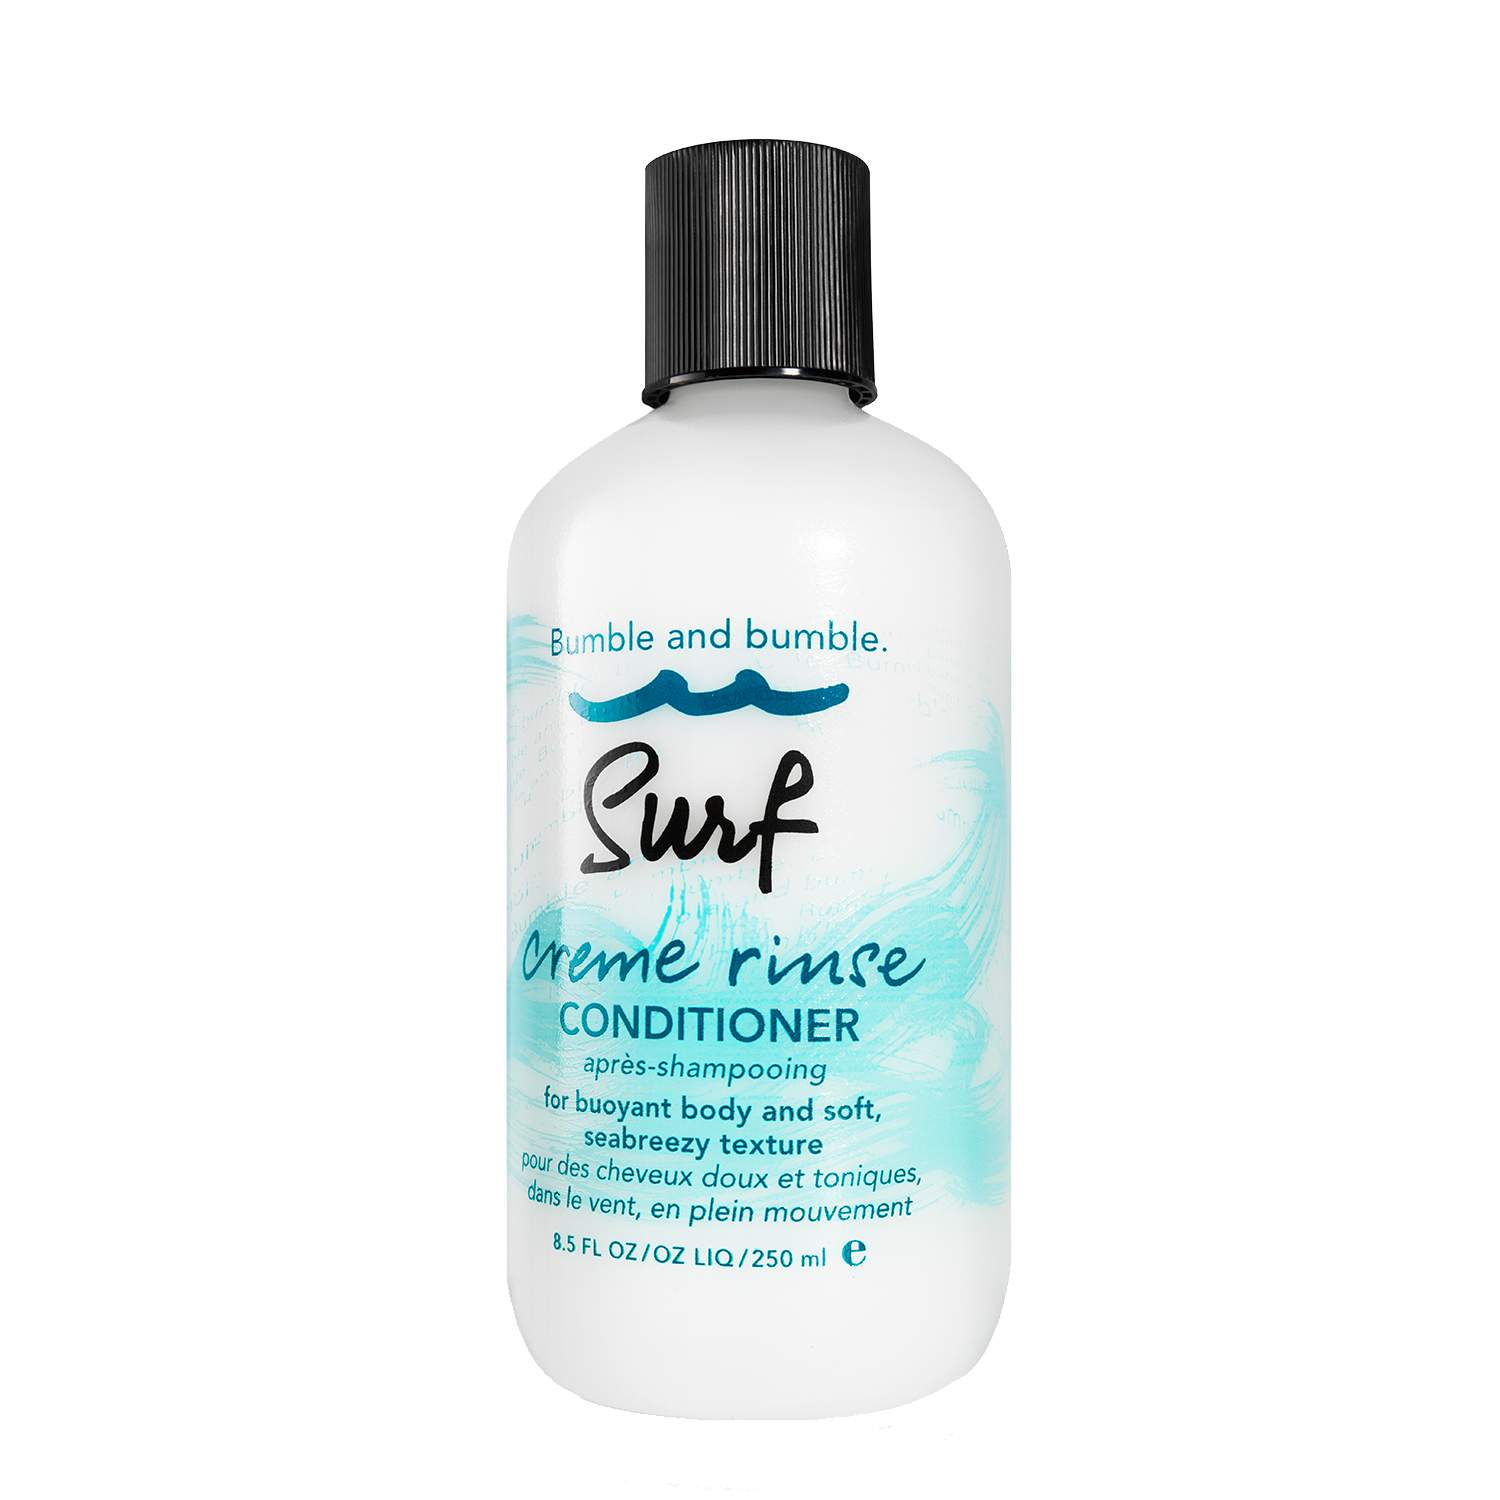 Bumble and bumble. Surf Creme Rinse Conditioner